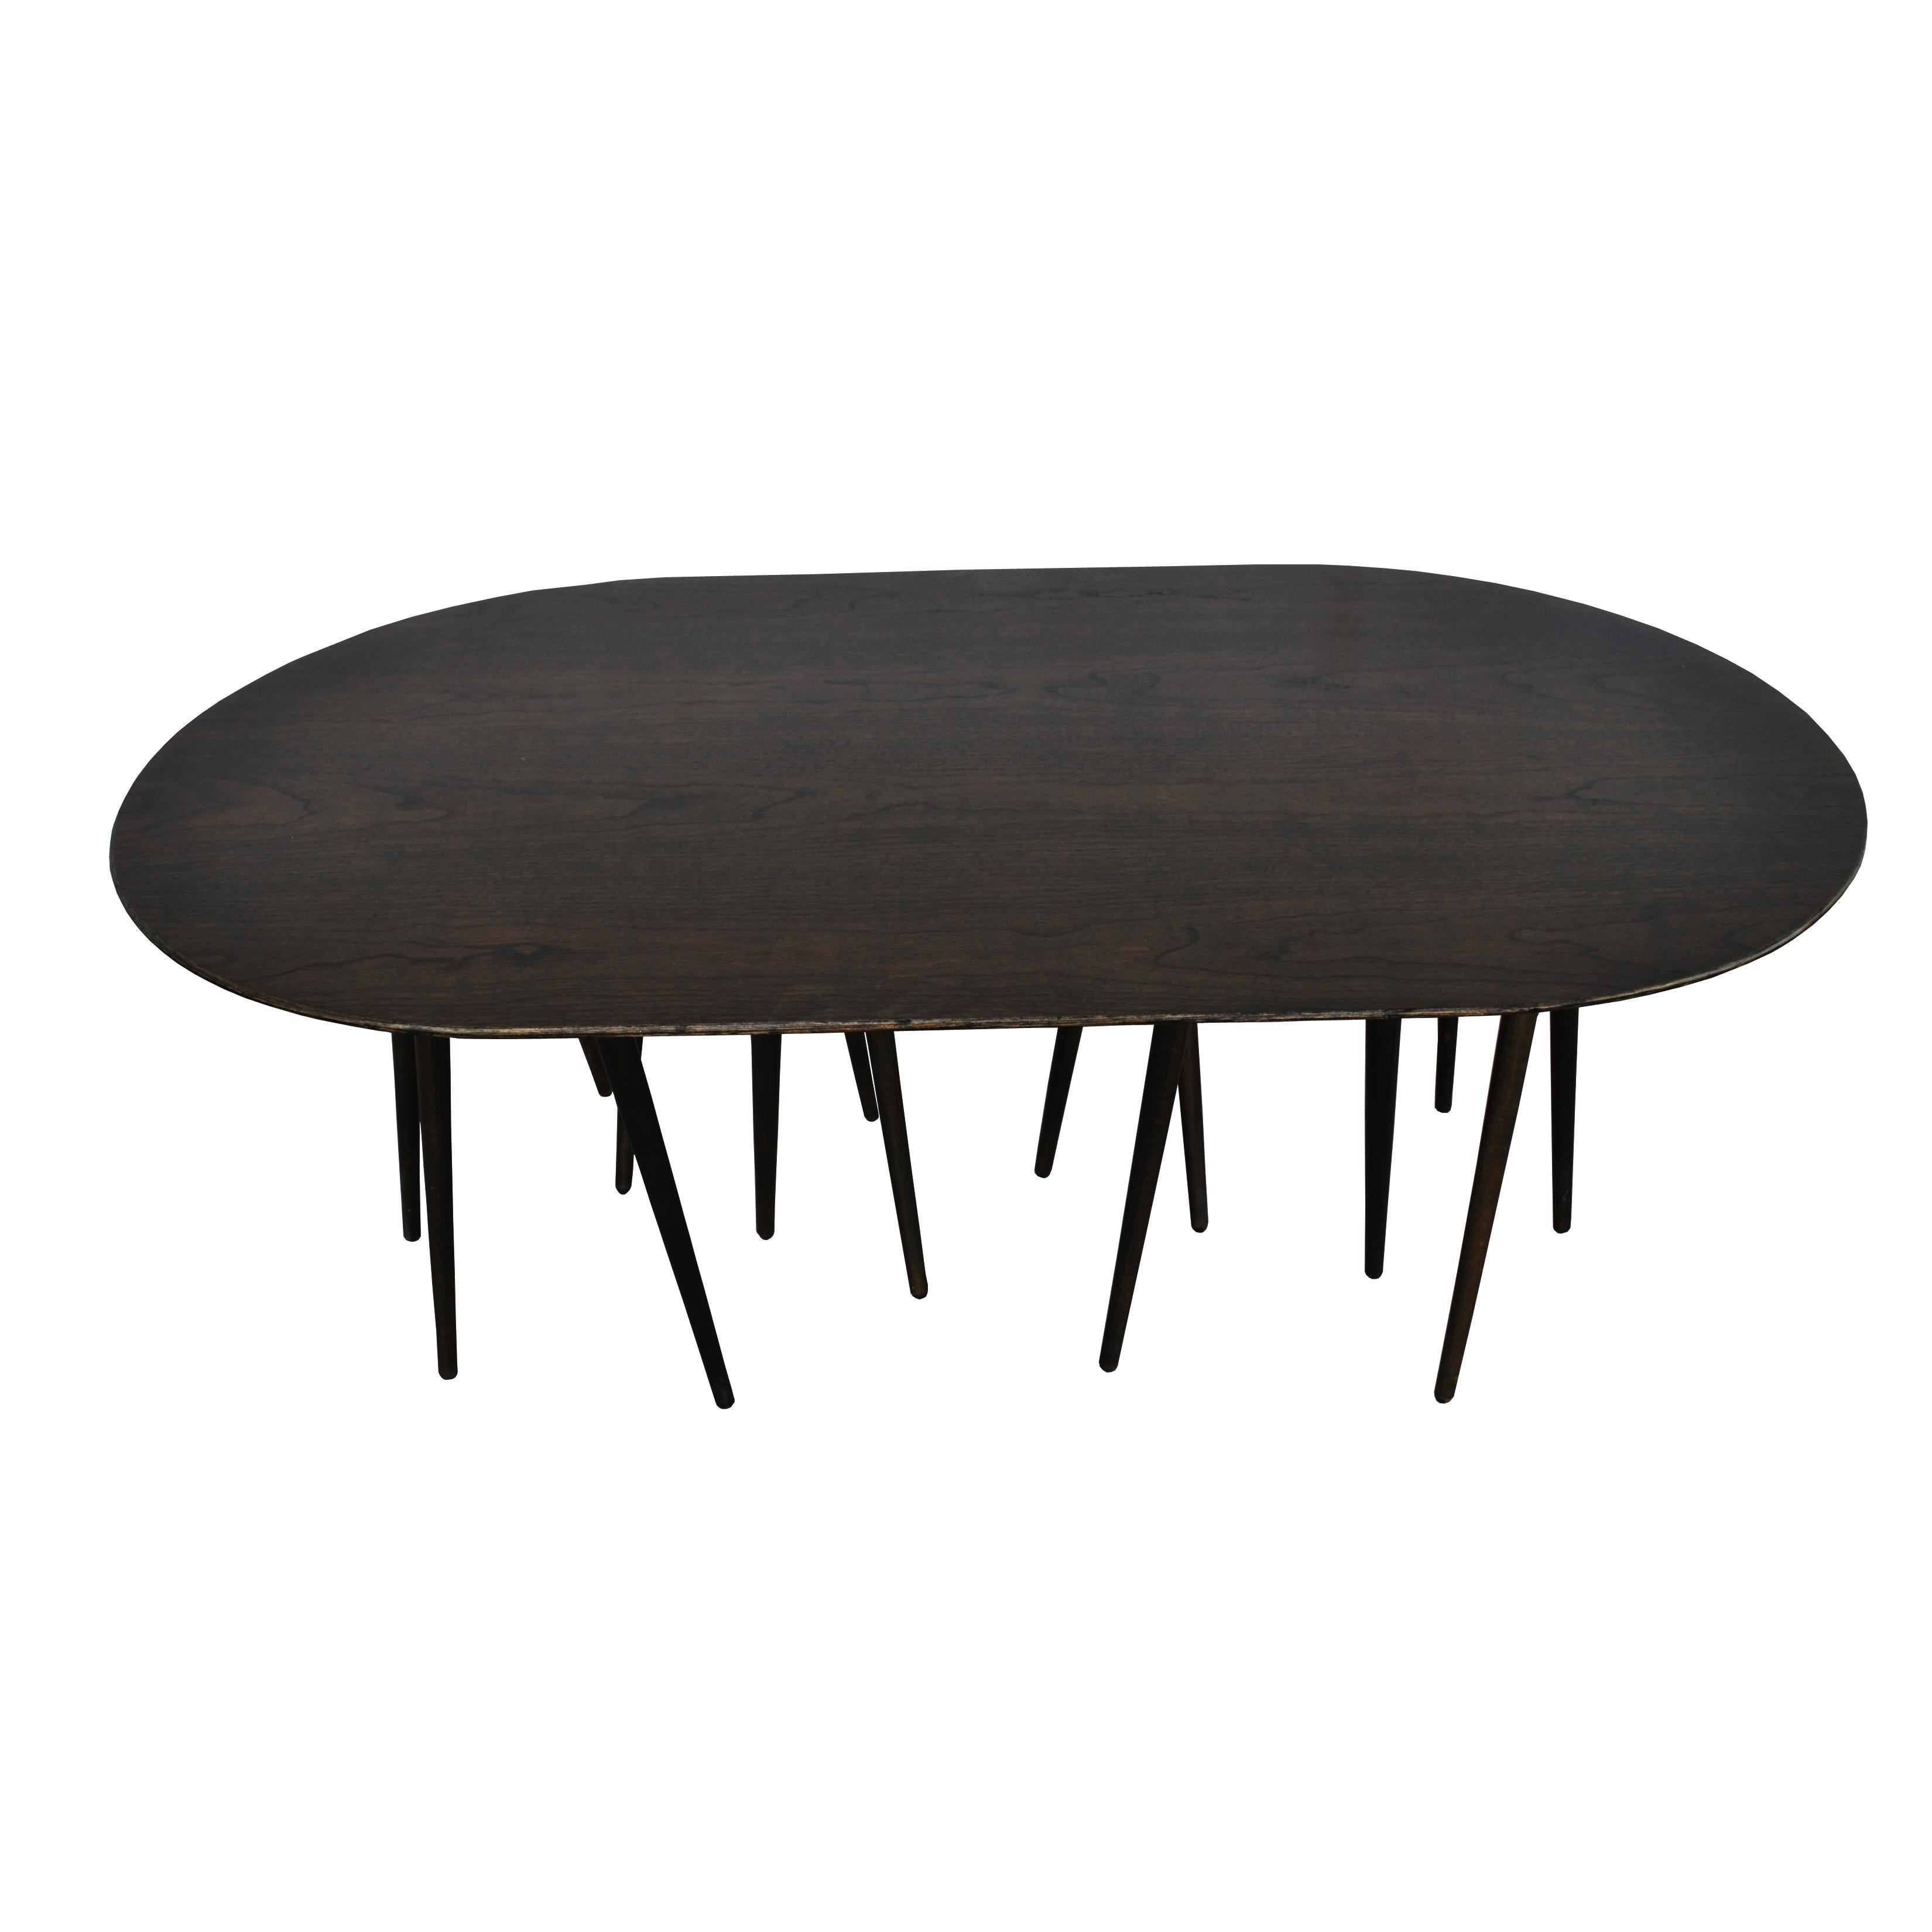 Toothpick table by Lawrence Laske for Knoll
1993 

Lawrence Laske designed the toothpick cactus table for Knoll in 1993. His inspiration was nature and based on simple, organic forms rendered from natural materials. 

The oval birch top and